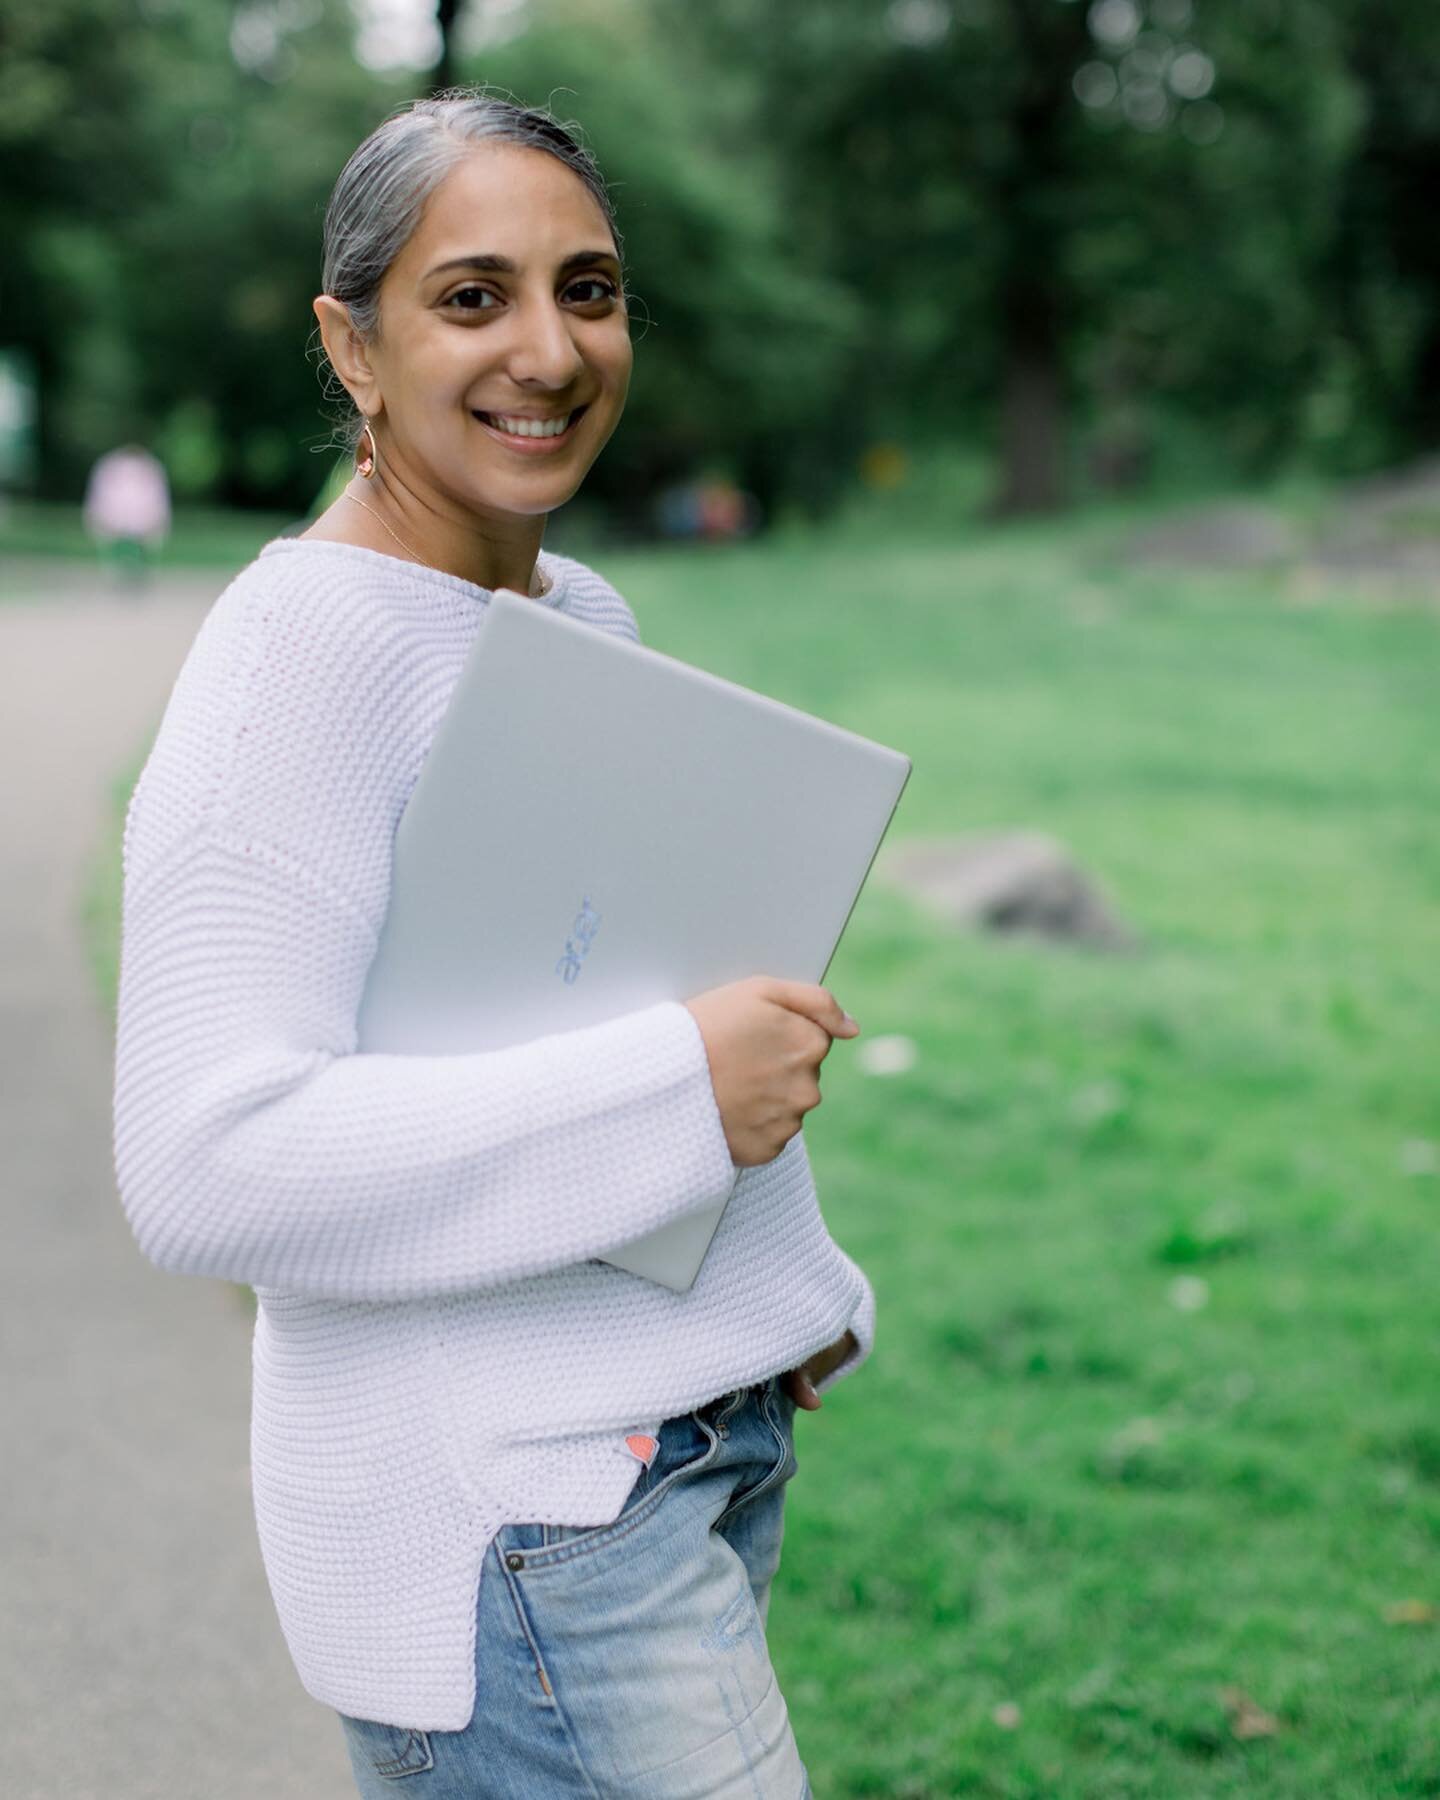 Now that the city is opening up, so are my options of where to work. #ad
The key to working from anywhere is to have the right laptop. For me, it&rsquo;s my @Acer_america Swift 3 powered by @Intel&rsquo;s Evo 11th Gen Core processor.
This laptop lets